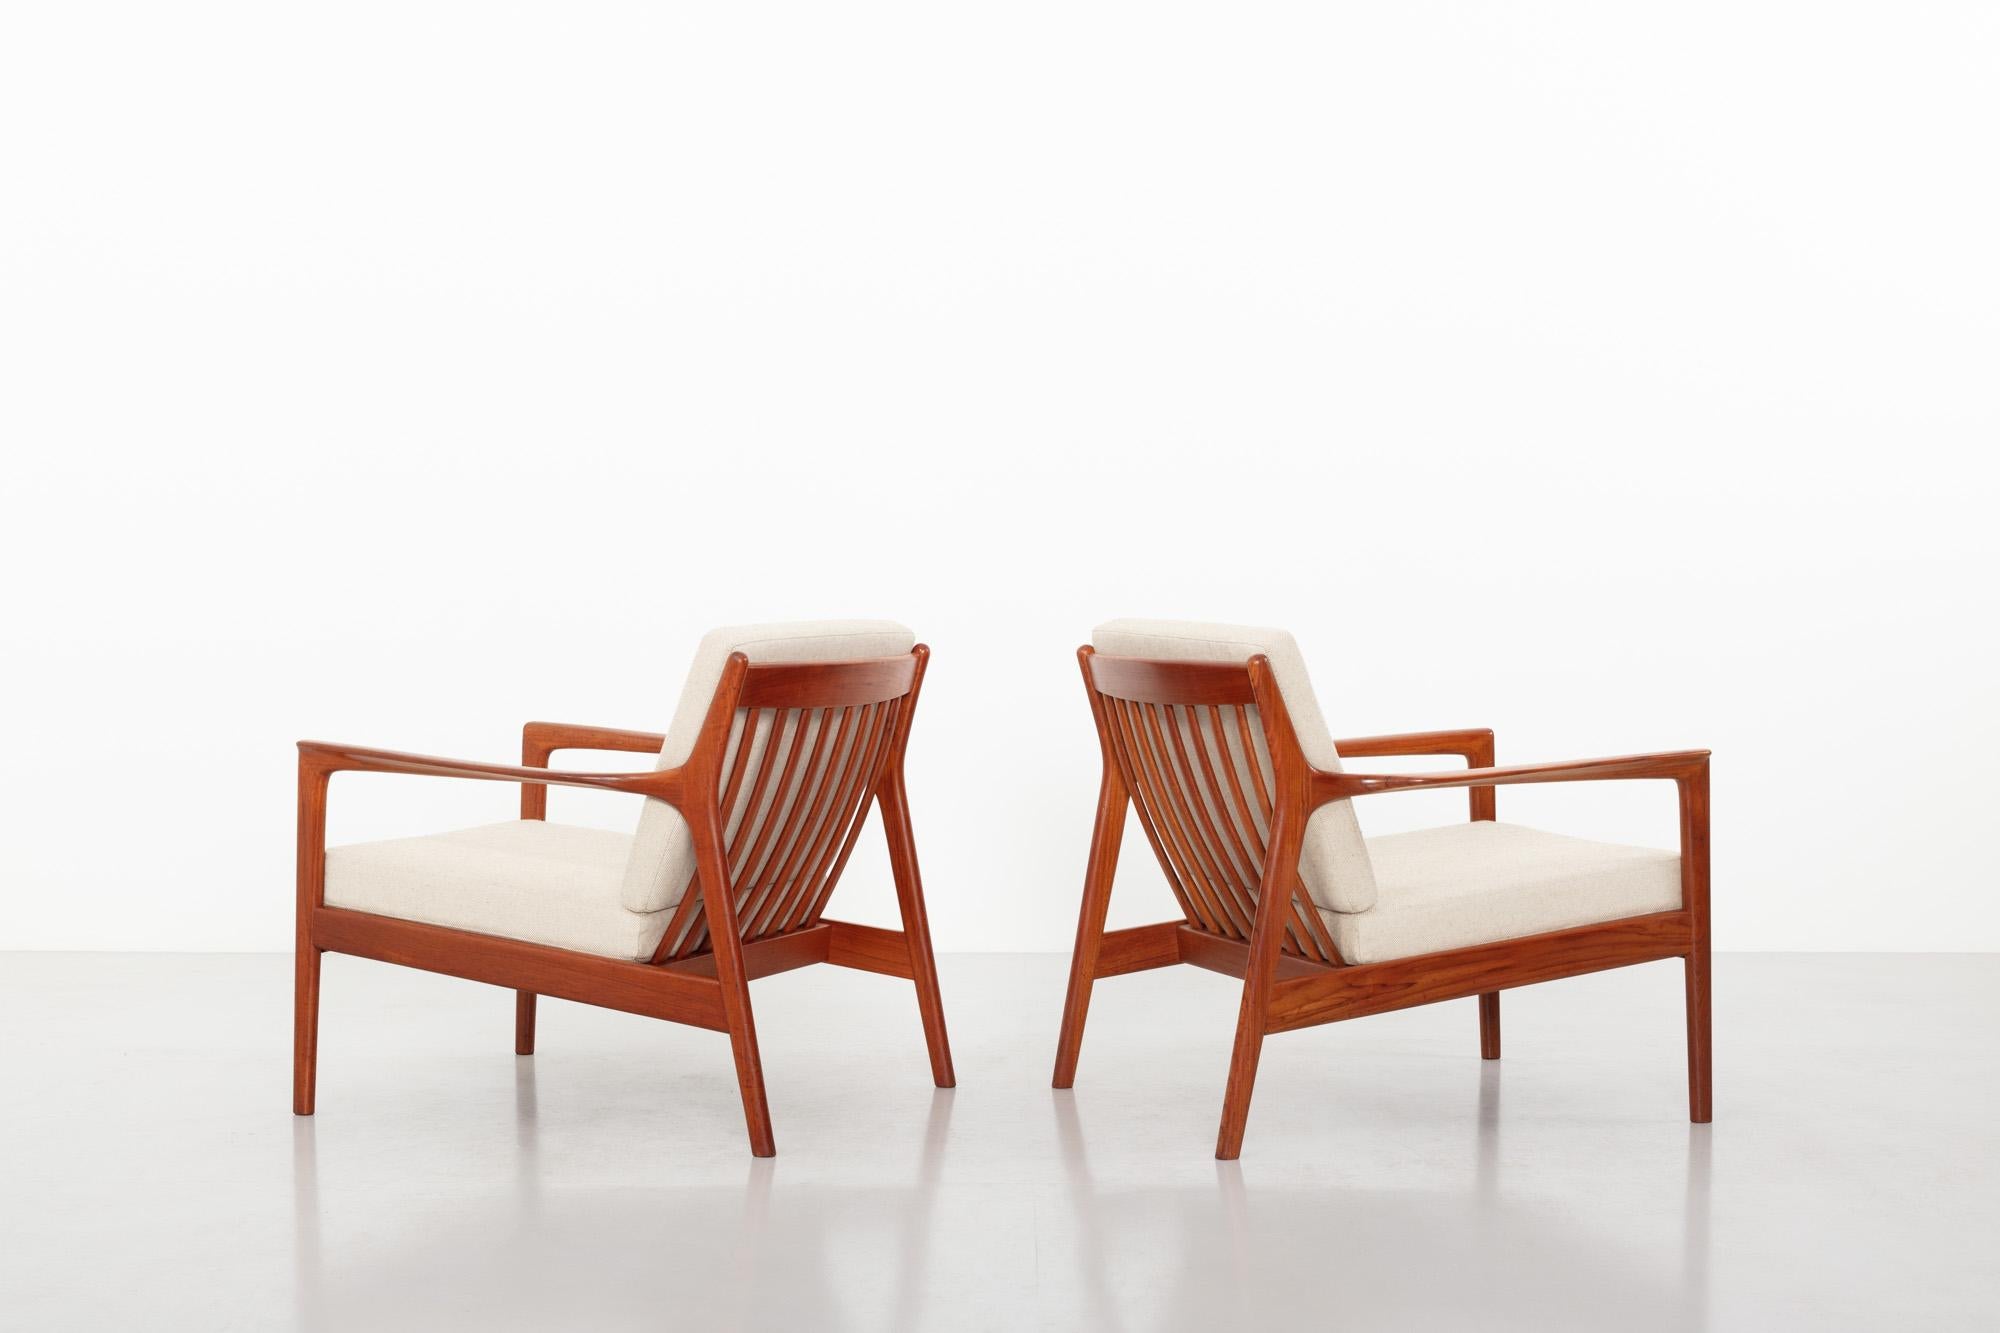 Scandinavian Modern USA-75 Easy Chairs by Folke Ohlsson for DUX, Sweden 1950s For Sale